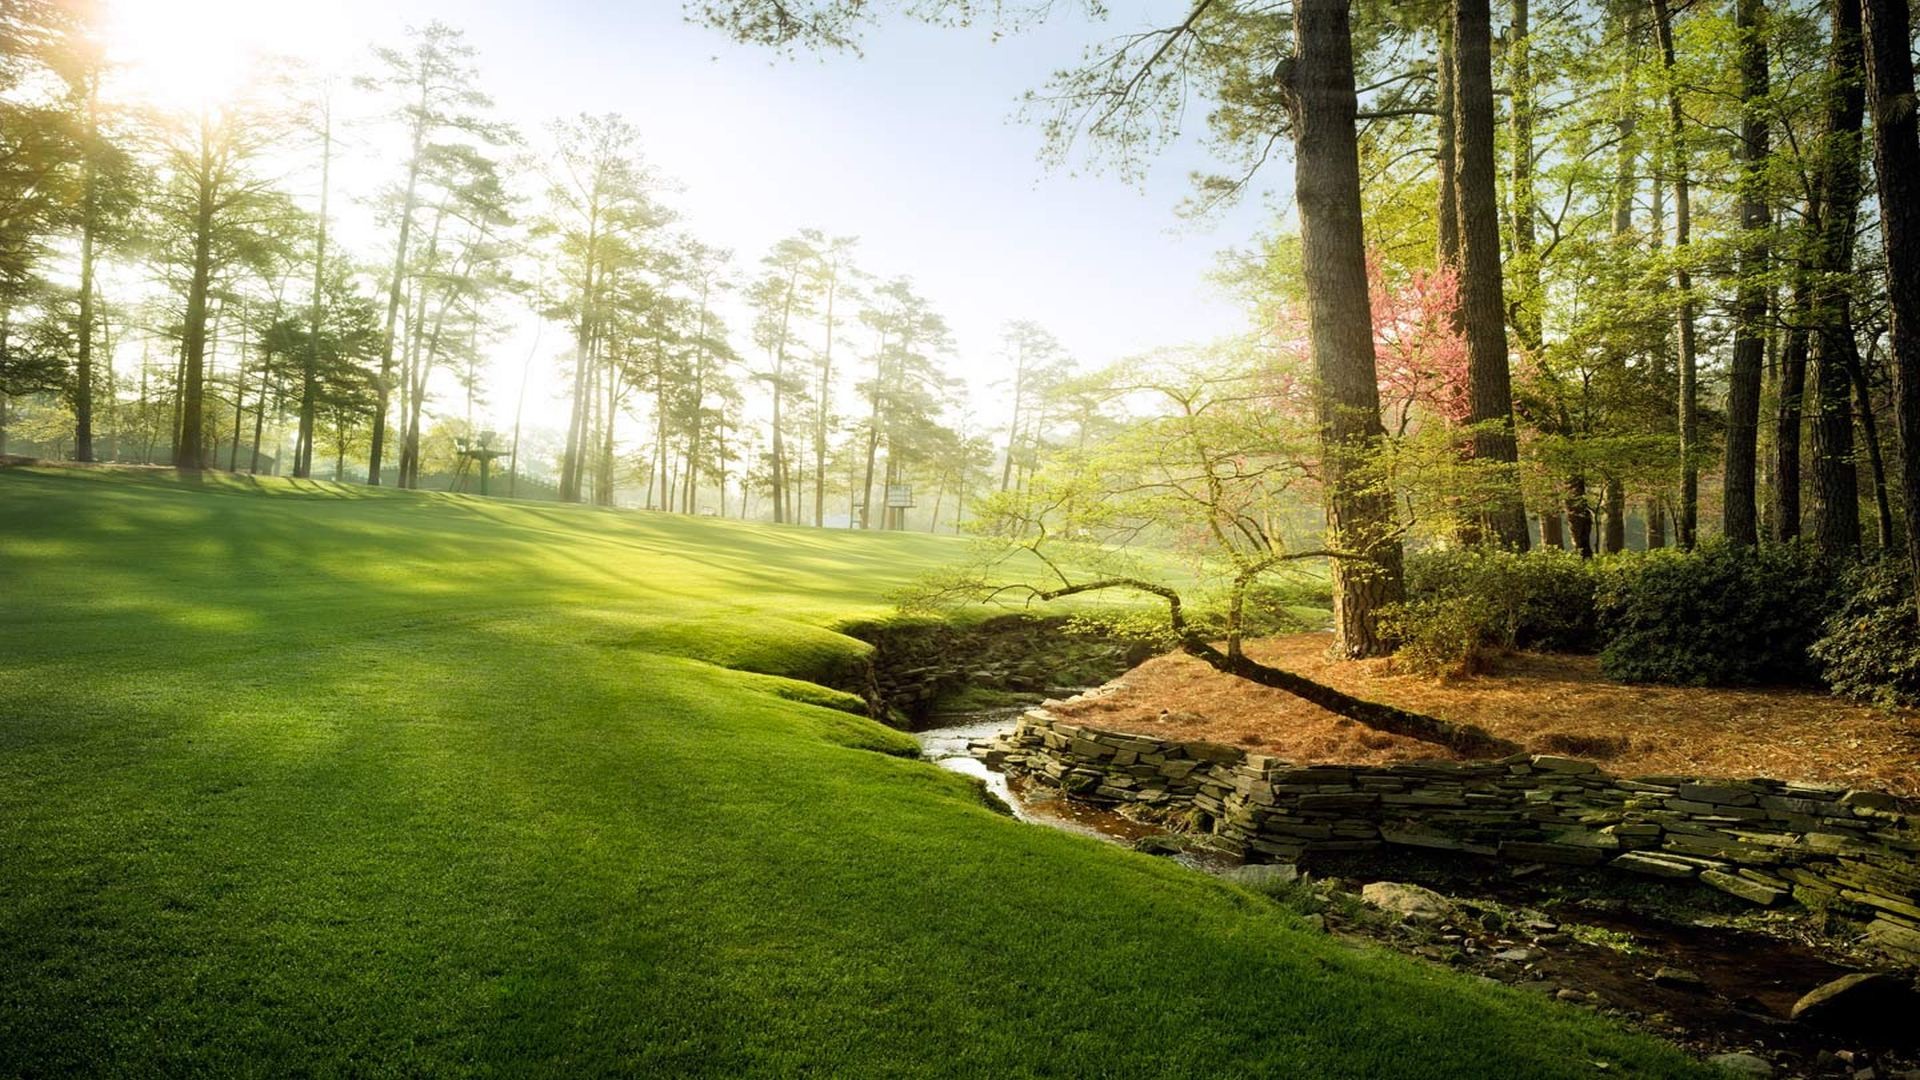 14 amazing Masters photos to spice up your phone and Zoom backgrounds